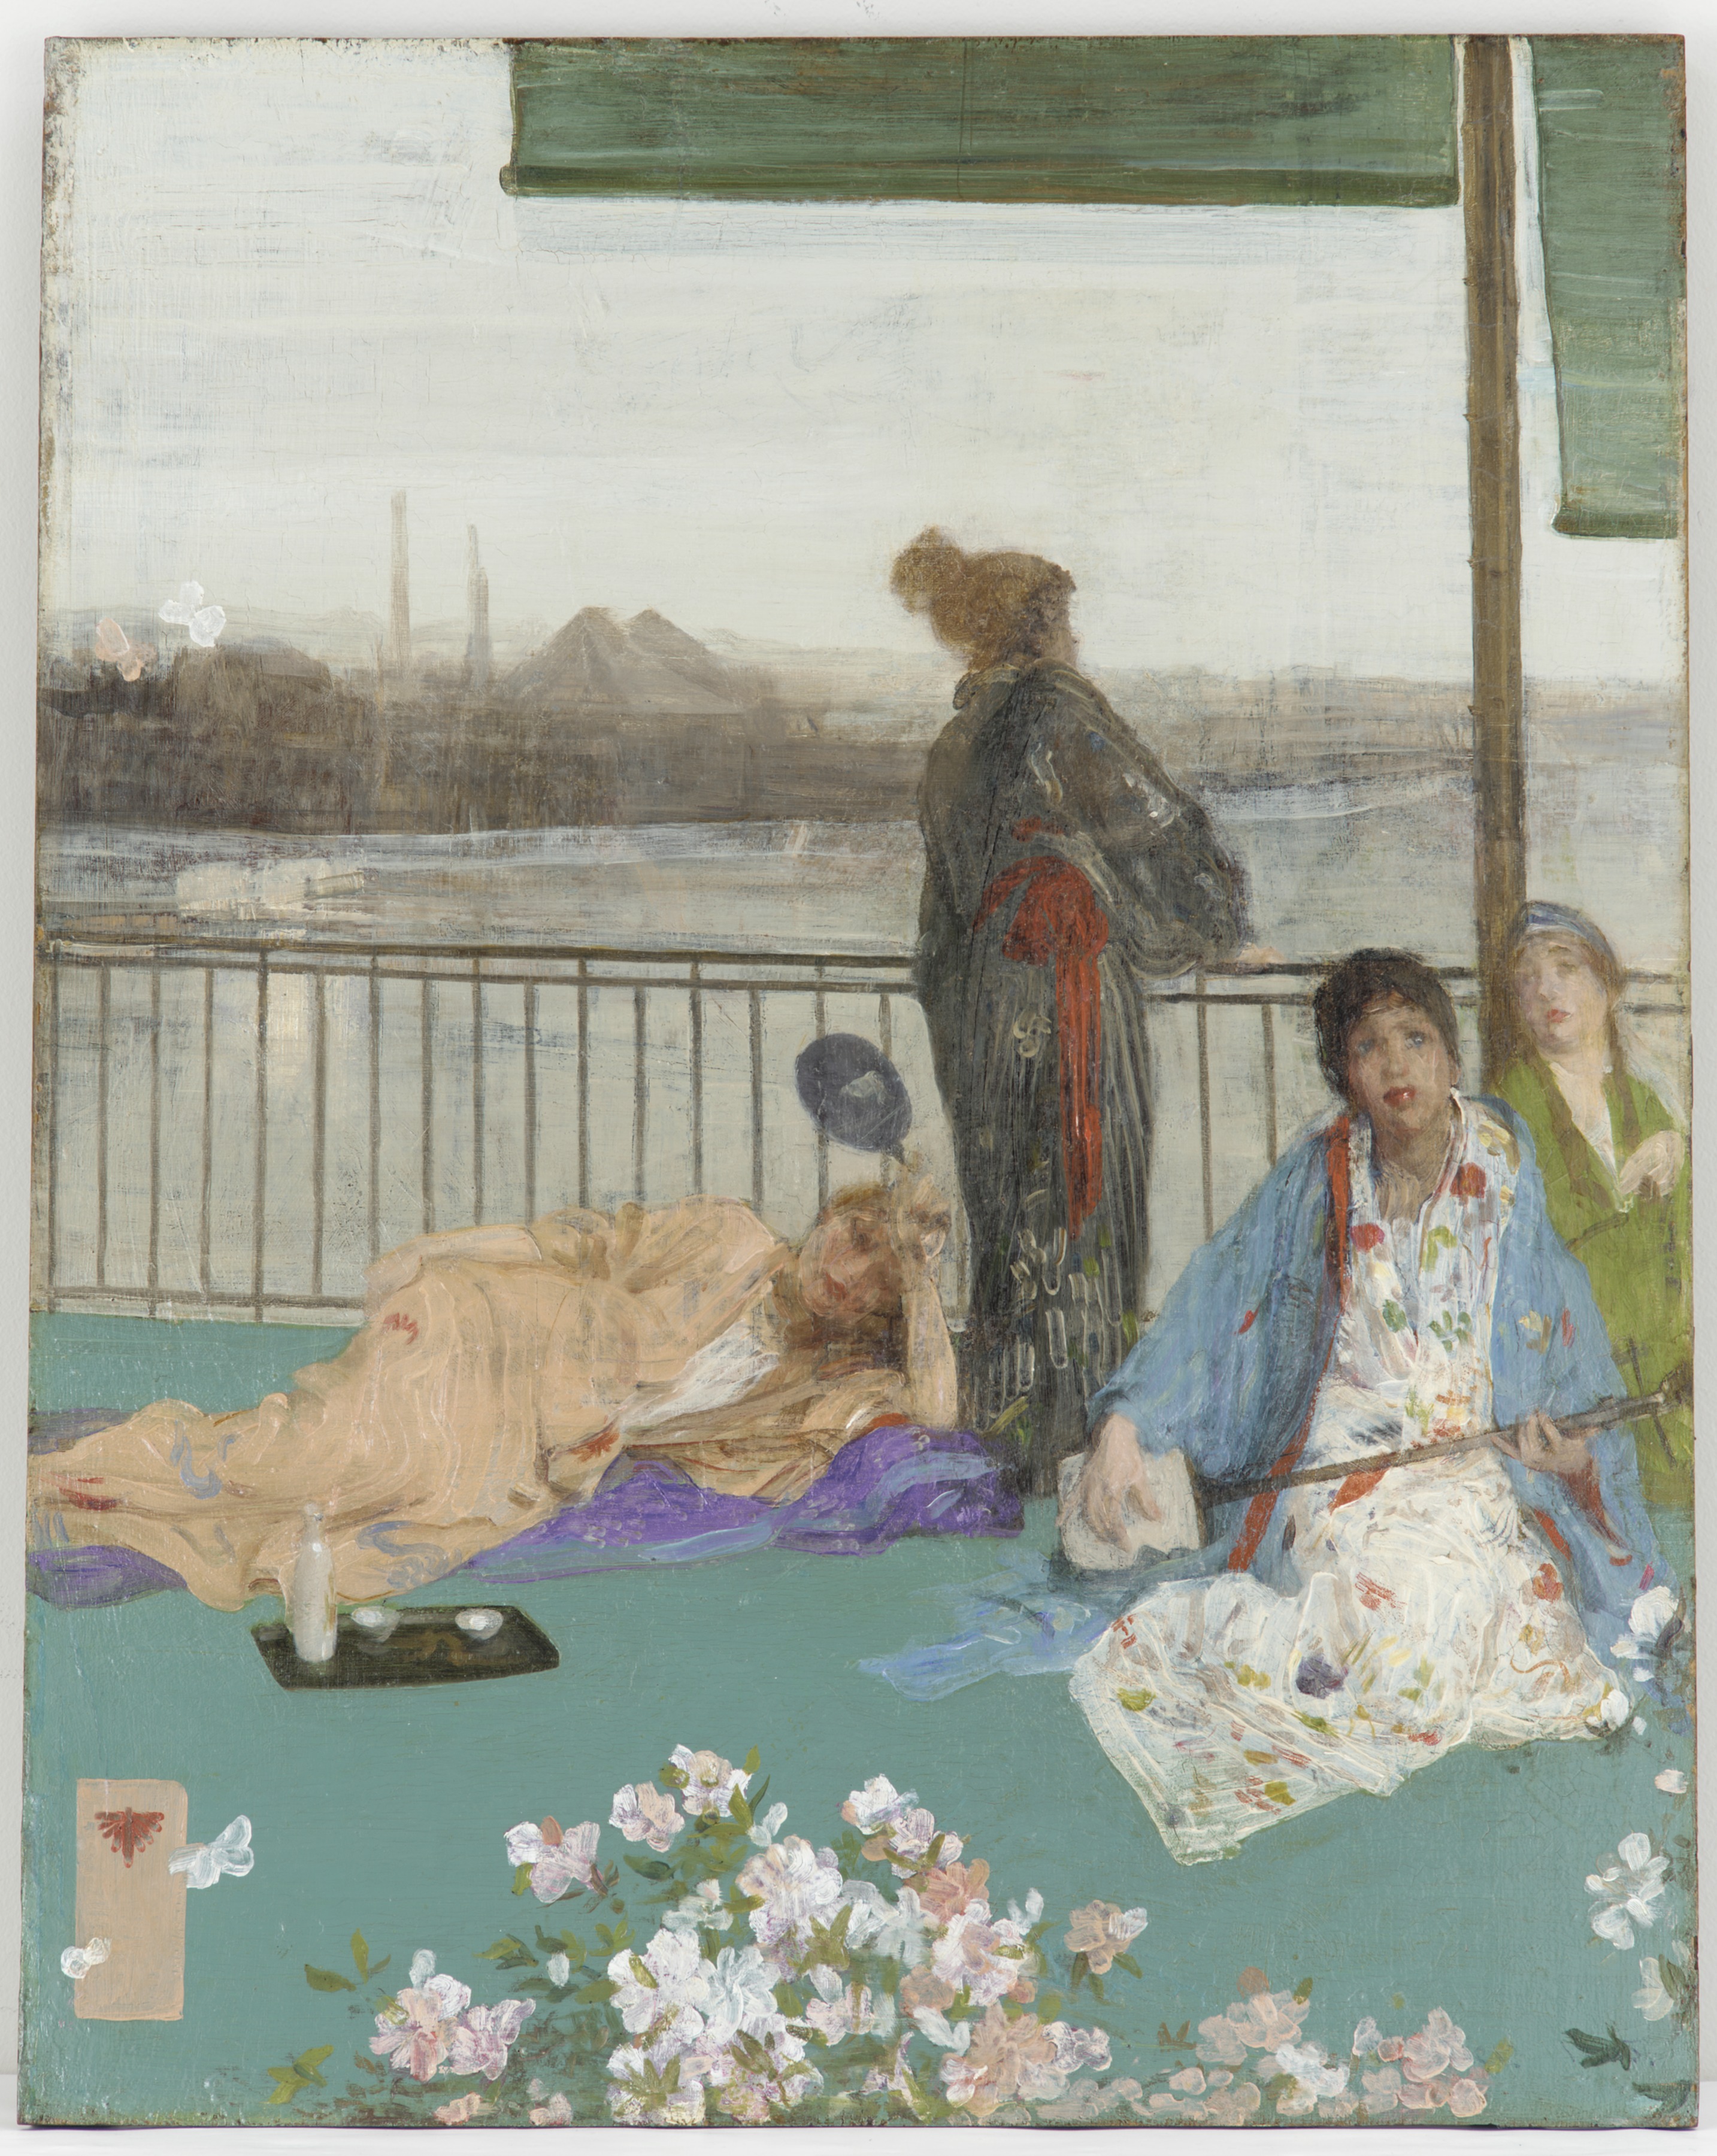 Variations in Flesh Colour and Green - The Balcony by James Abbott McNeill Whistler - 1864-1870 - 61.4 × 48.5 cm National Museum of Asian Art